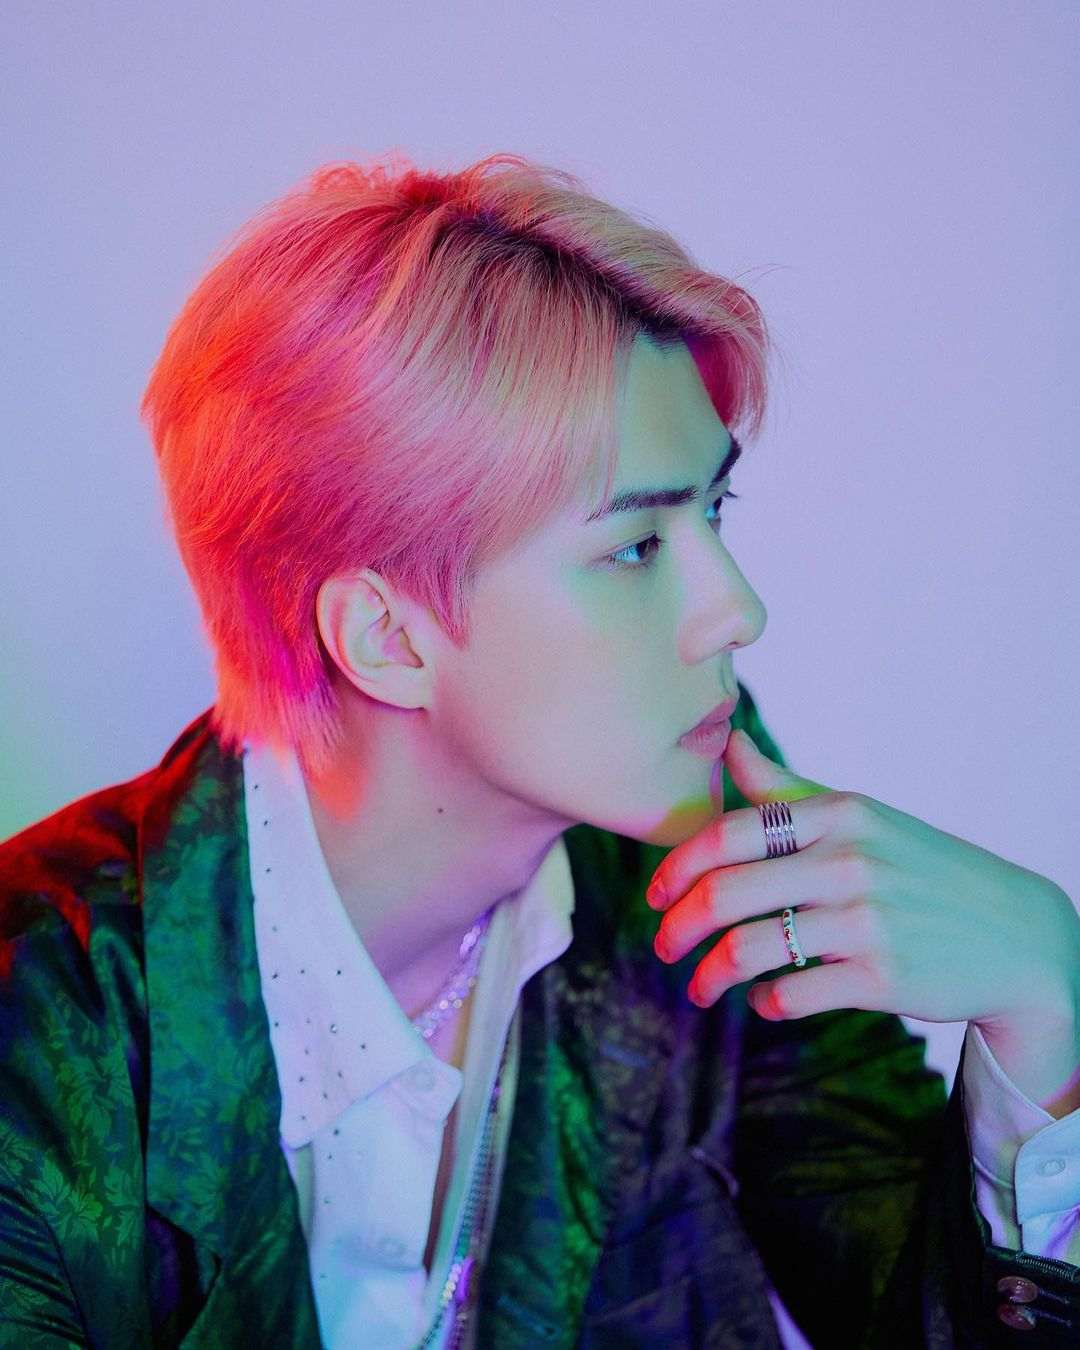 Sehun EXO - Biography, Profile, Facts, and Career